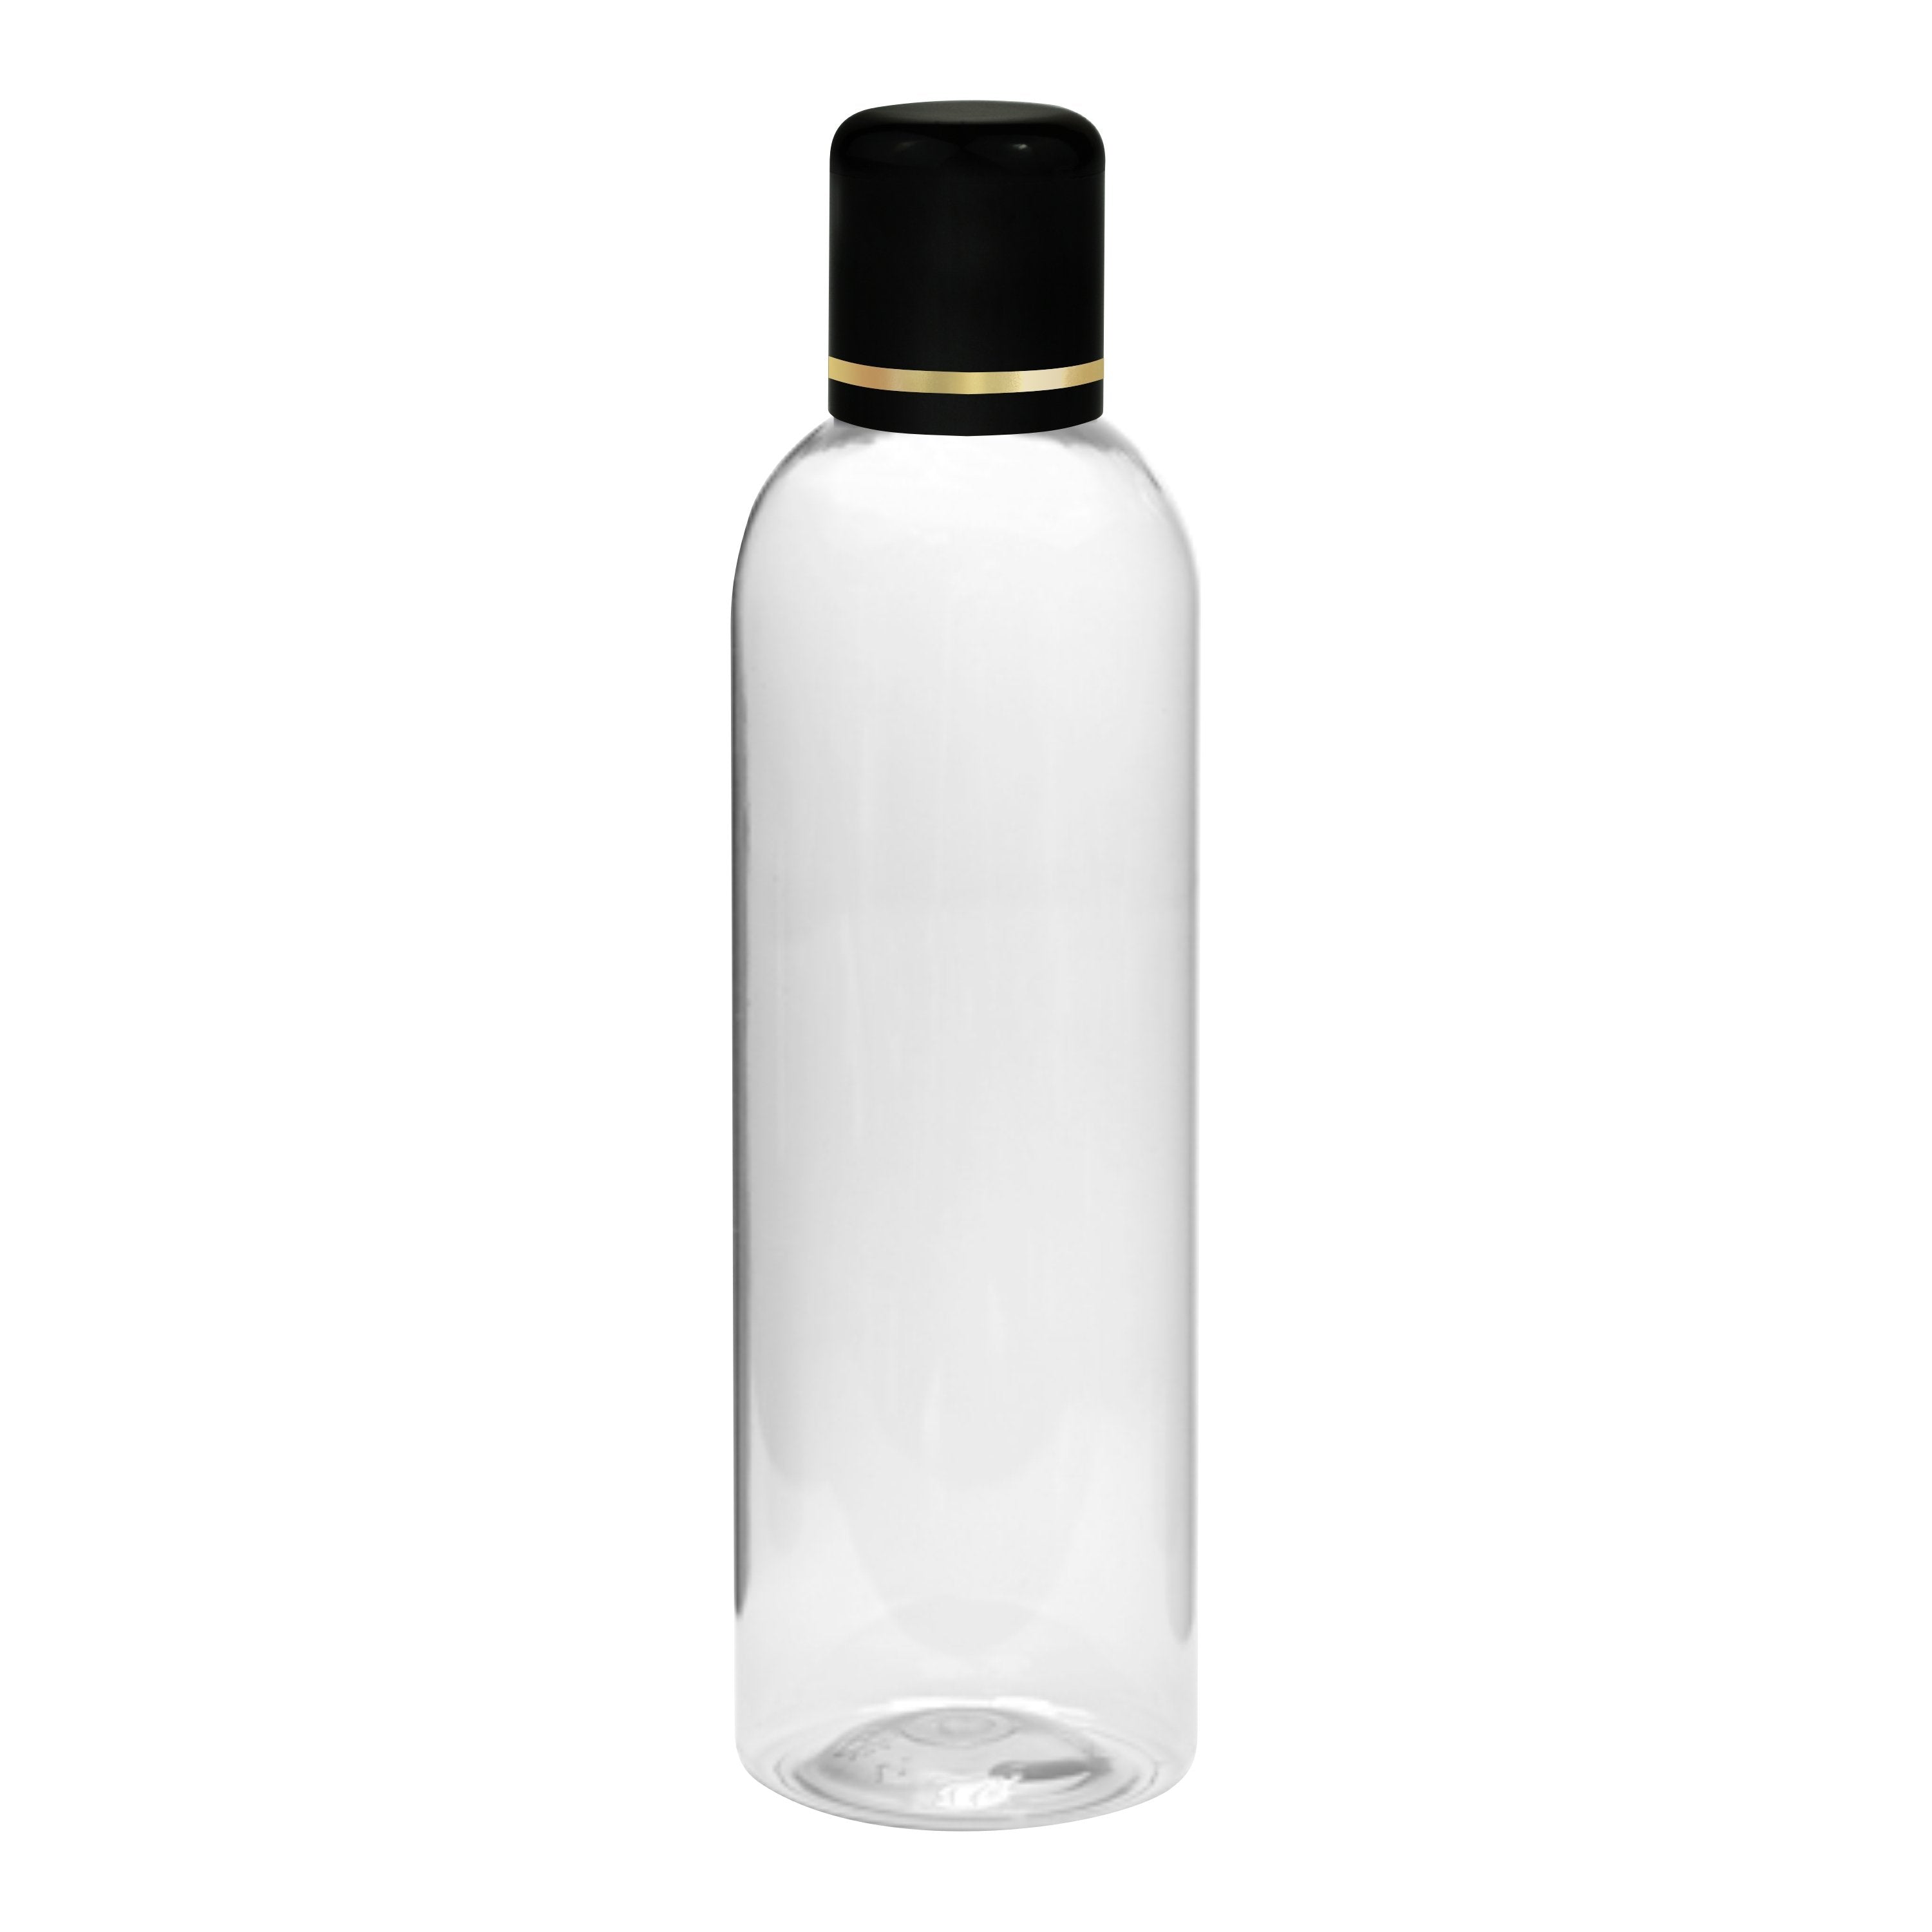 zenvista 100ml and 200ml transparent bottle with screw cap, transparent  bottle,  white bottle, serum bottles,  refillable containers , premium bottles,  pet bottles , pet bottle,  perfume bottles , glass bottle,  food coloring bottles,  empty bottles for serum,  dropper bottle,  cosmetics empty containers,  bottle,  blue bottle,  beautiful cosmetic bottles